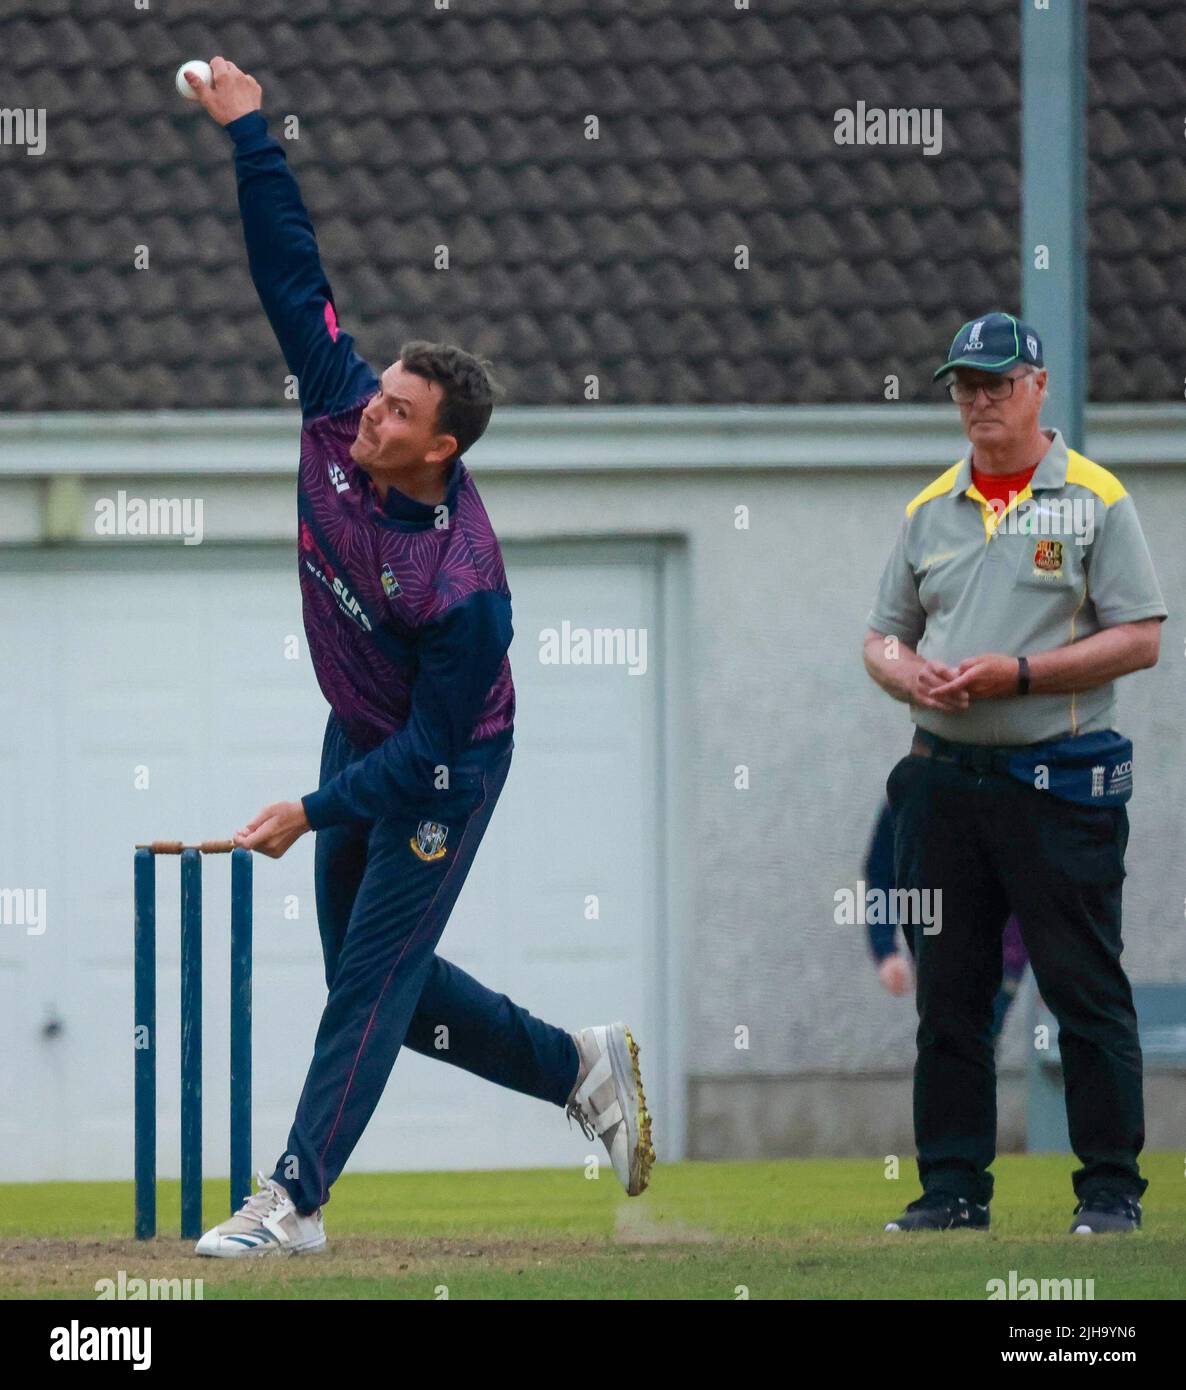 The Lawn, Waringstown, Northern Ireland, UK. 16 Jul 2022. The Lagan Valley Steels Twenty 20 Cup Final 2022. CIYMS v CSNI – CIYMS won by 16 runs (DLS) in a rain-affected match. CIYMS bowler in action in today's final. Credit: David Hunter/Alamy Live News. Stock Photo